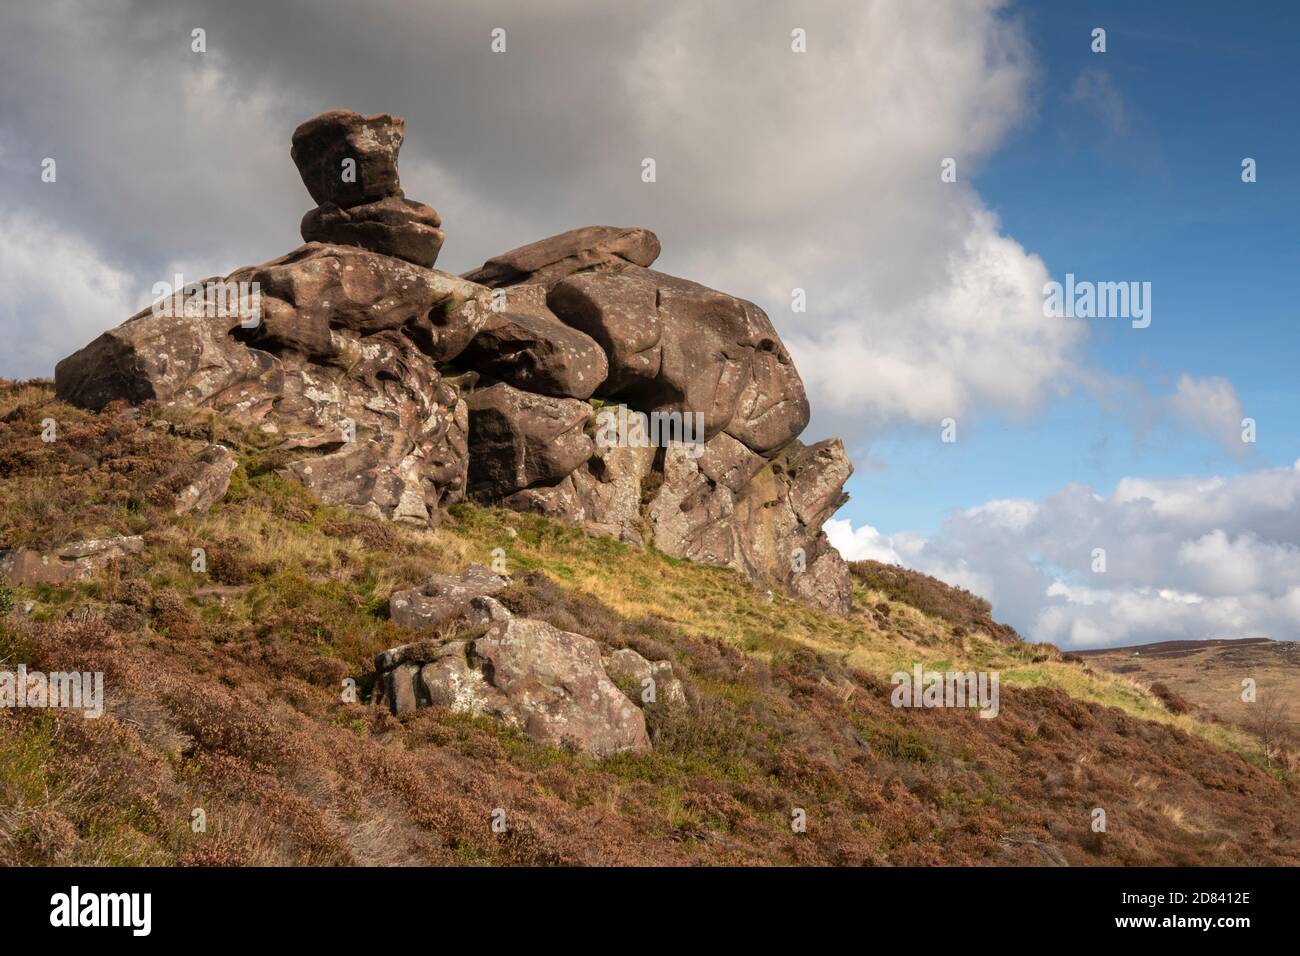 UK, England, Staffordshire, Moorlands, The Roaches, Ramshaw Rocks eroded sandstone formation Stock Photo